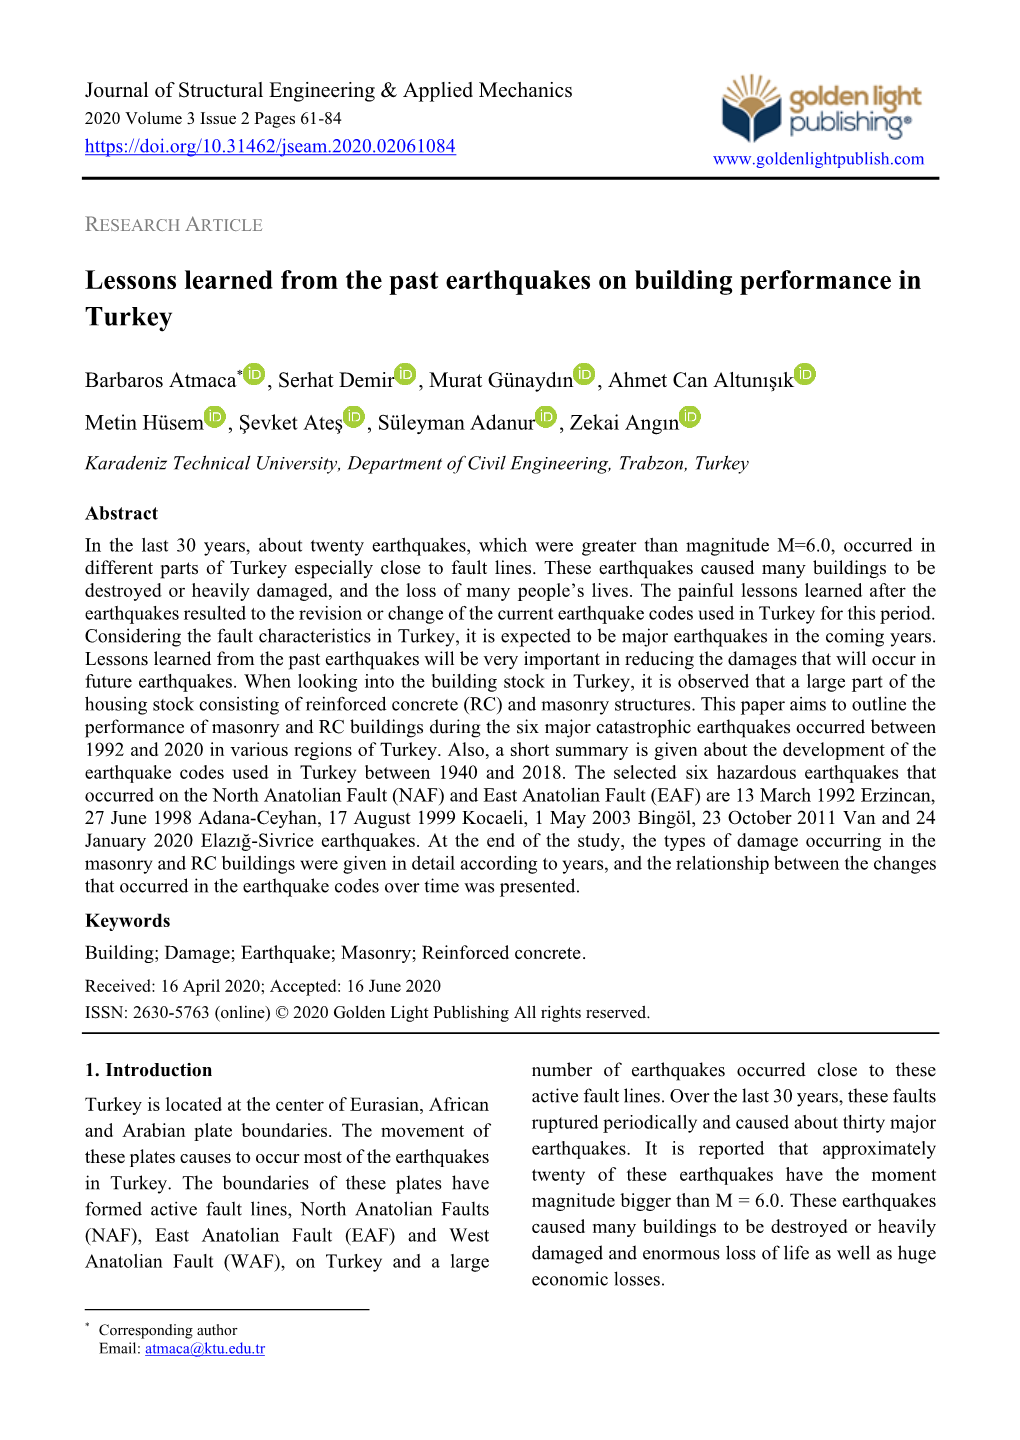 Lessons Learned from the Past Earthquakes on Building Performance in Turkey